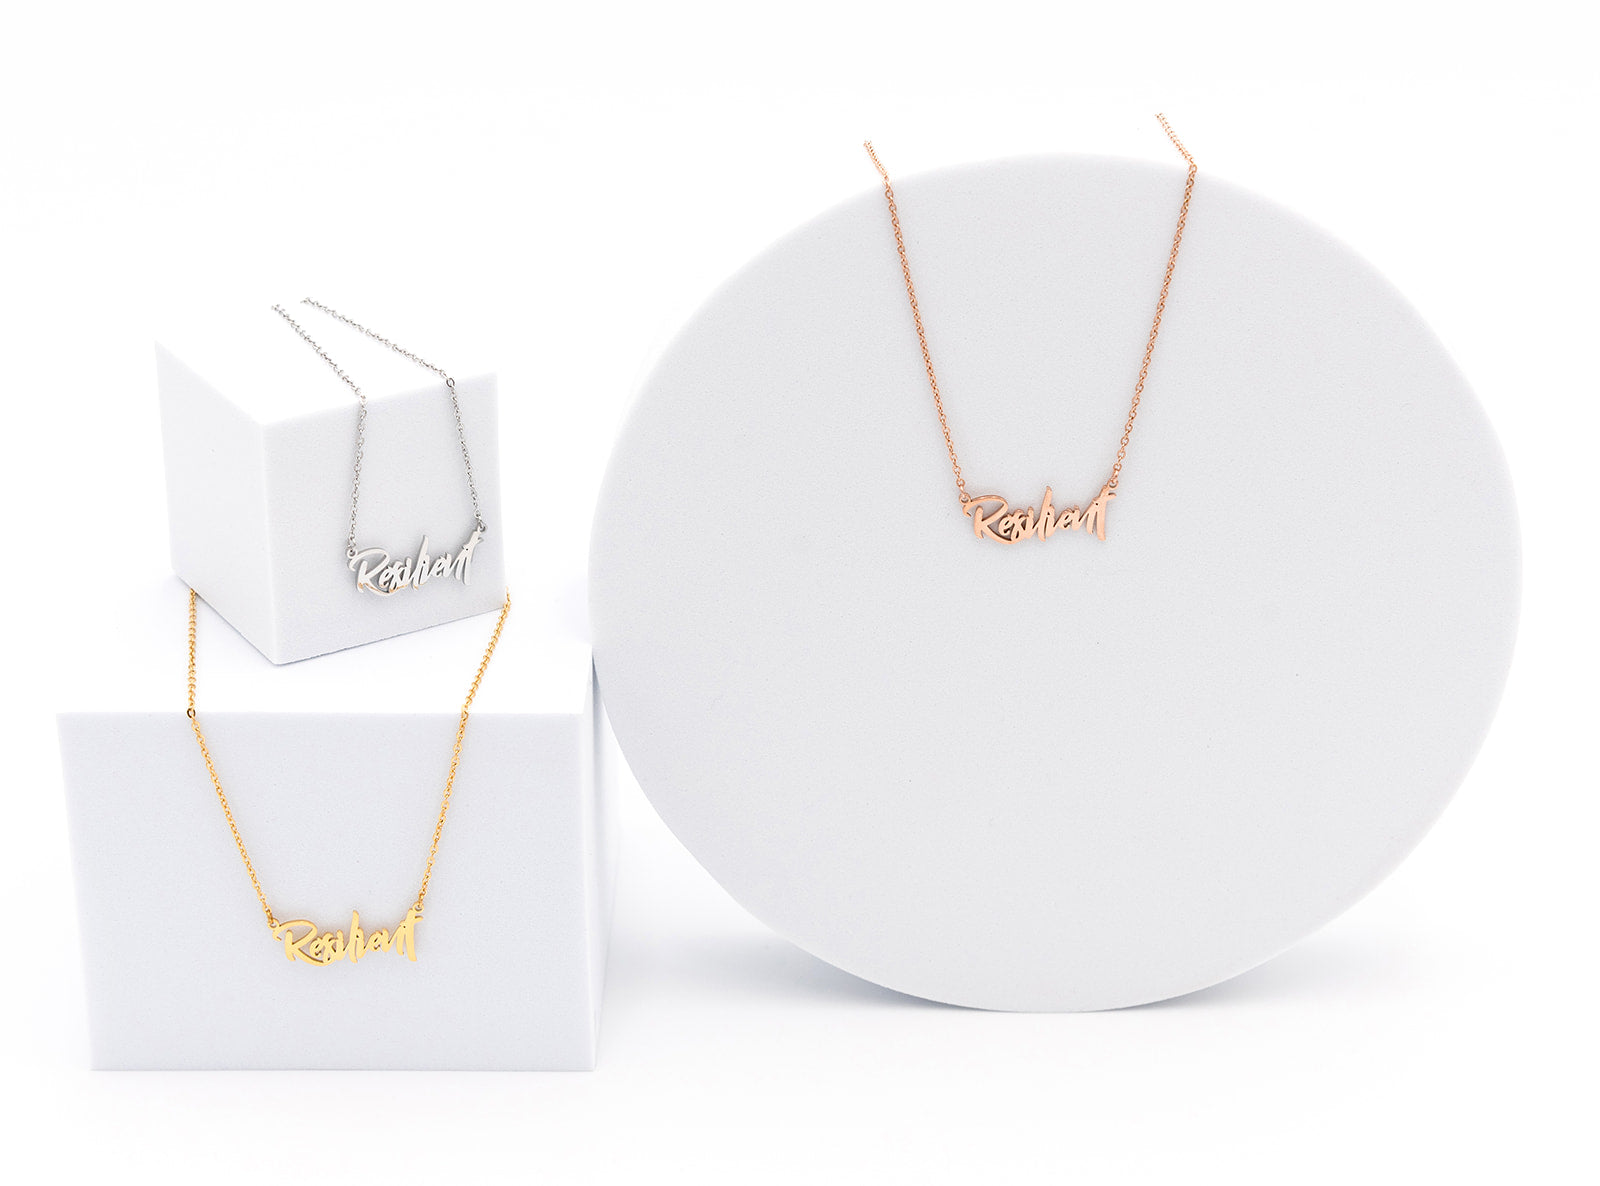 resilient affirmation necklaces from sol rise essentials positive jewelry